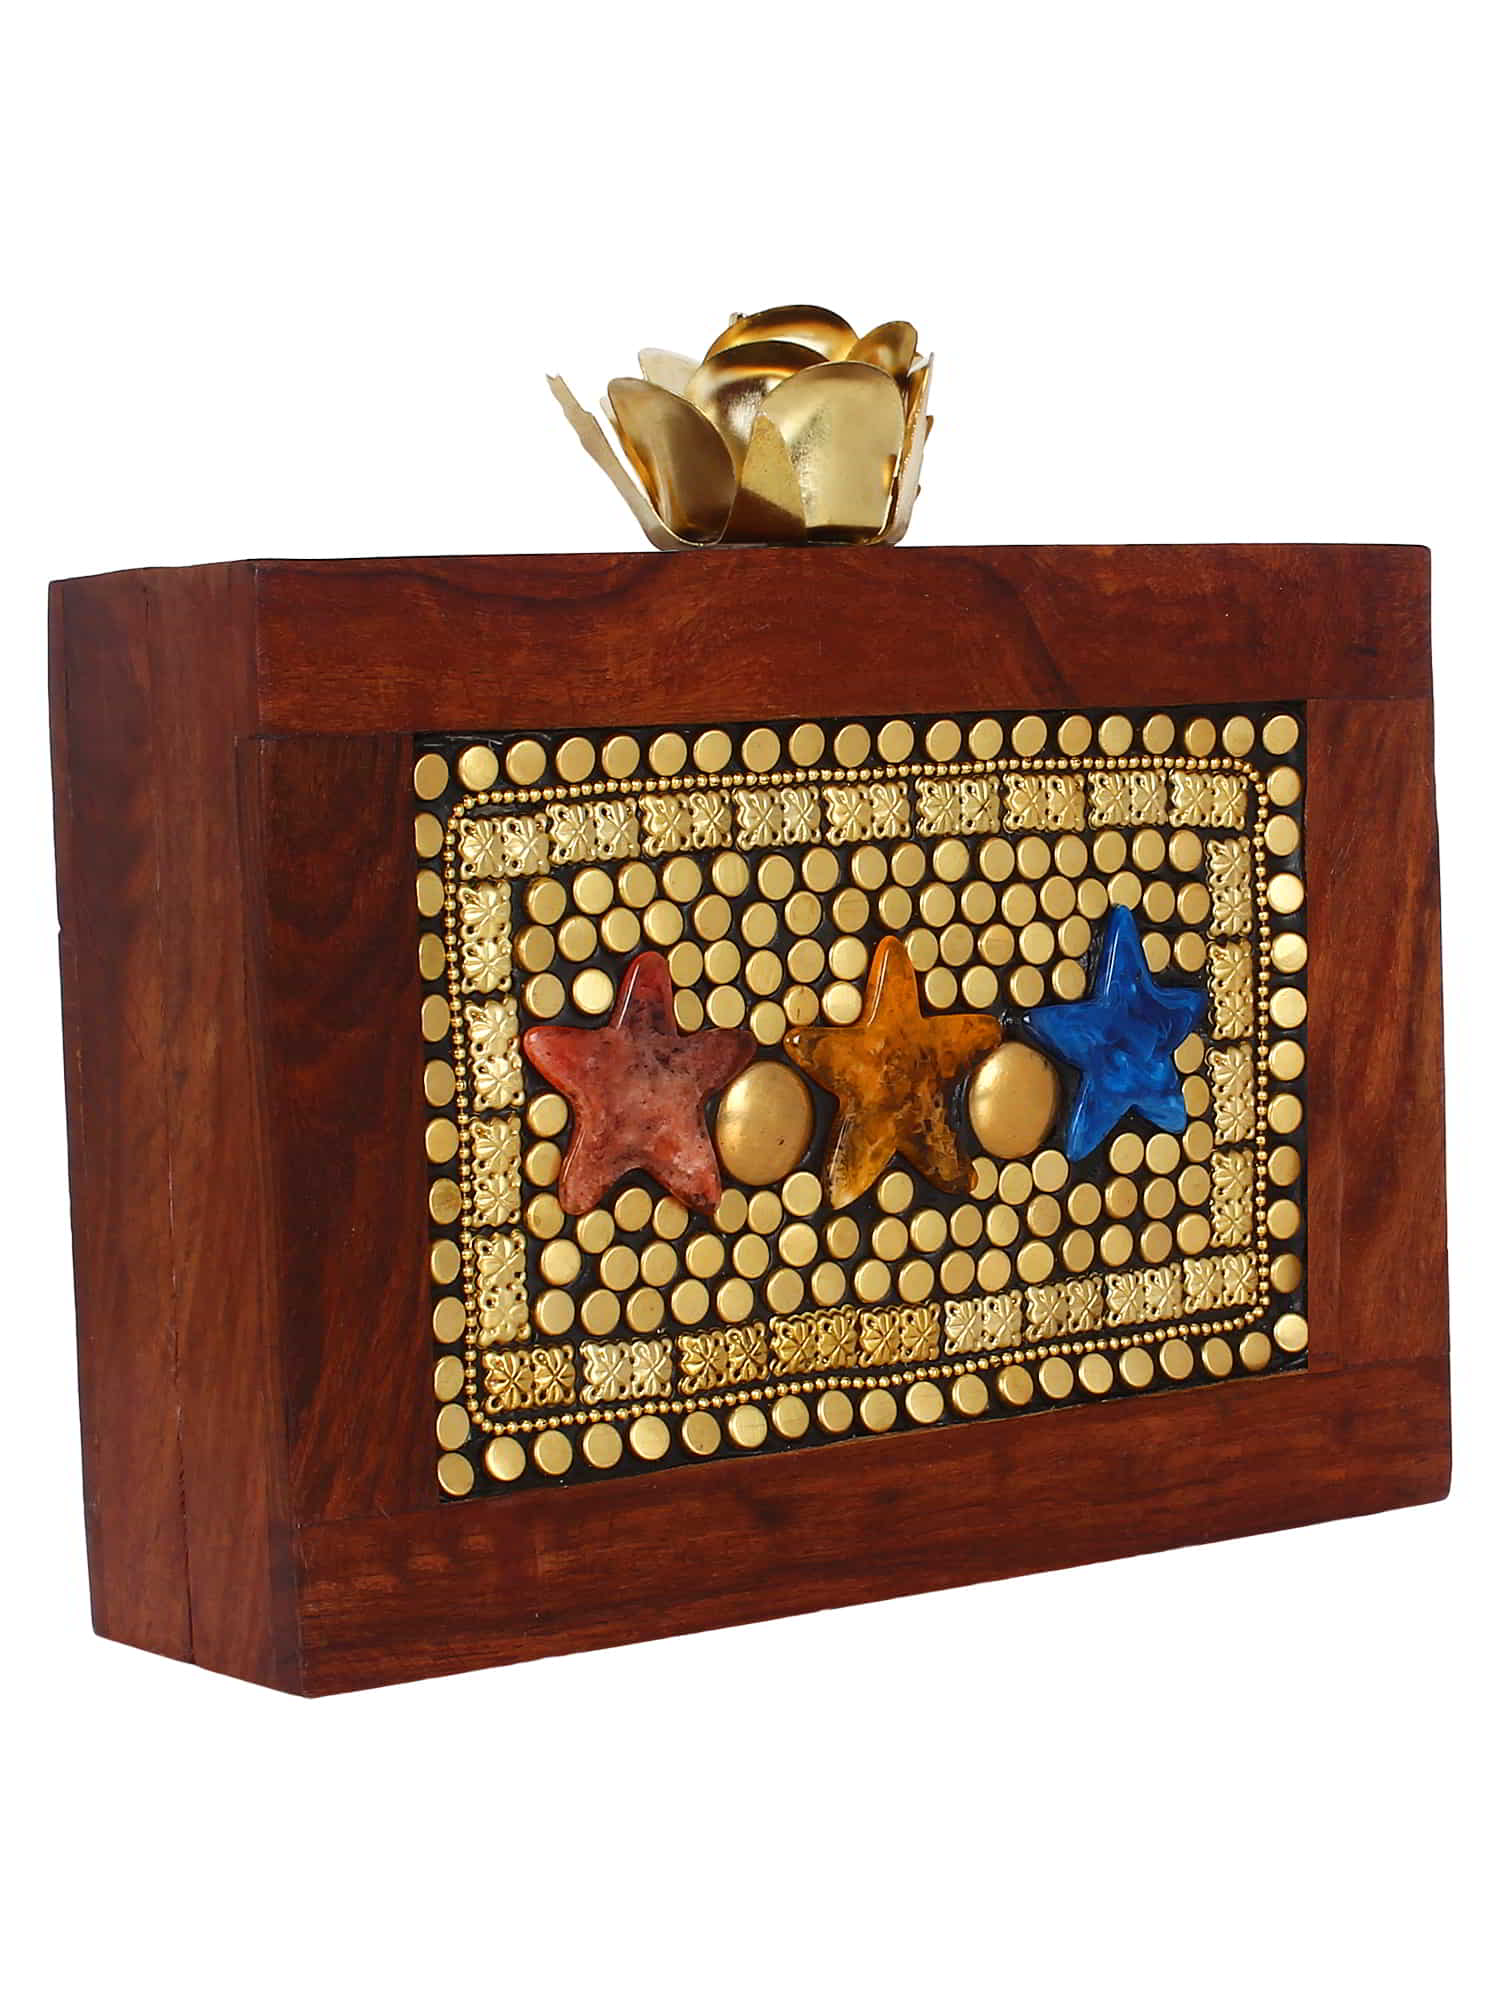 Balk Mosaic Wooden and Stone Clutch